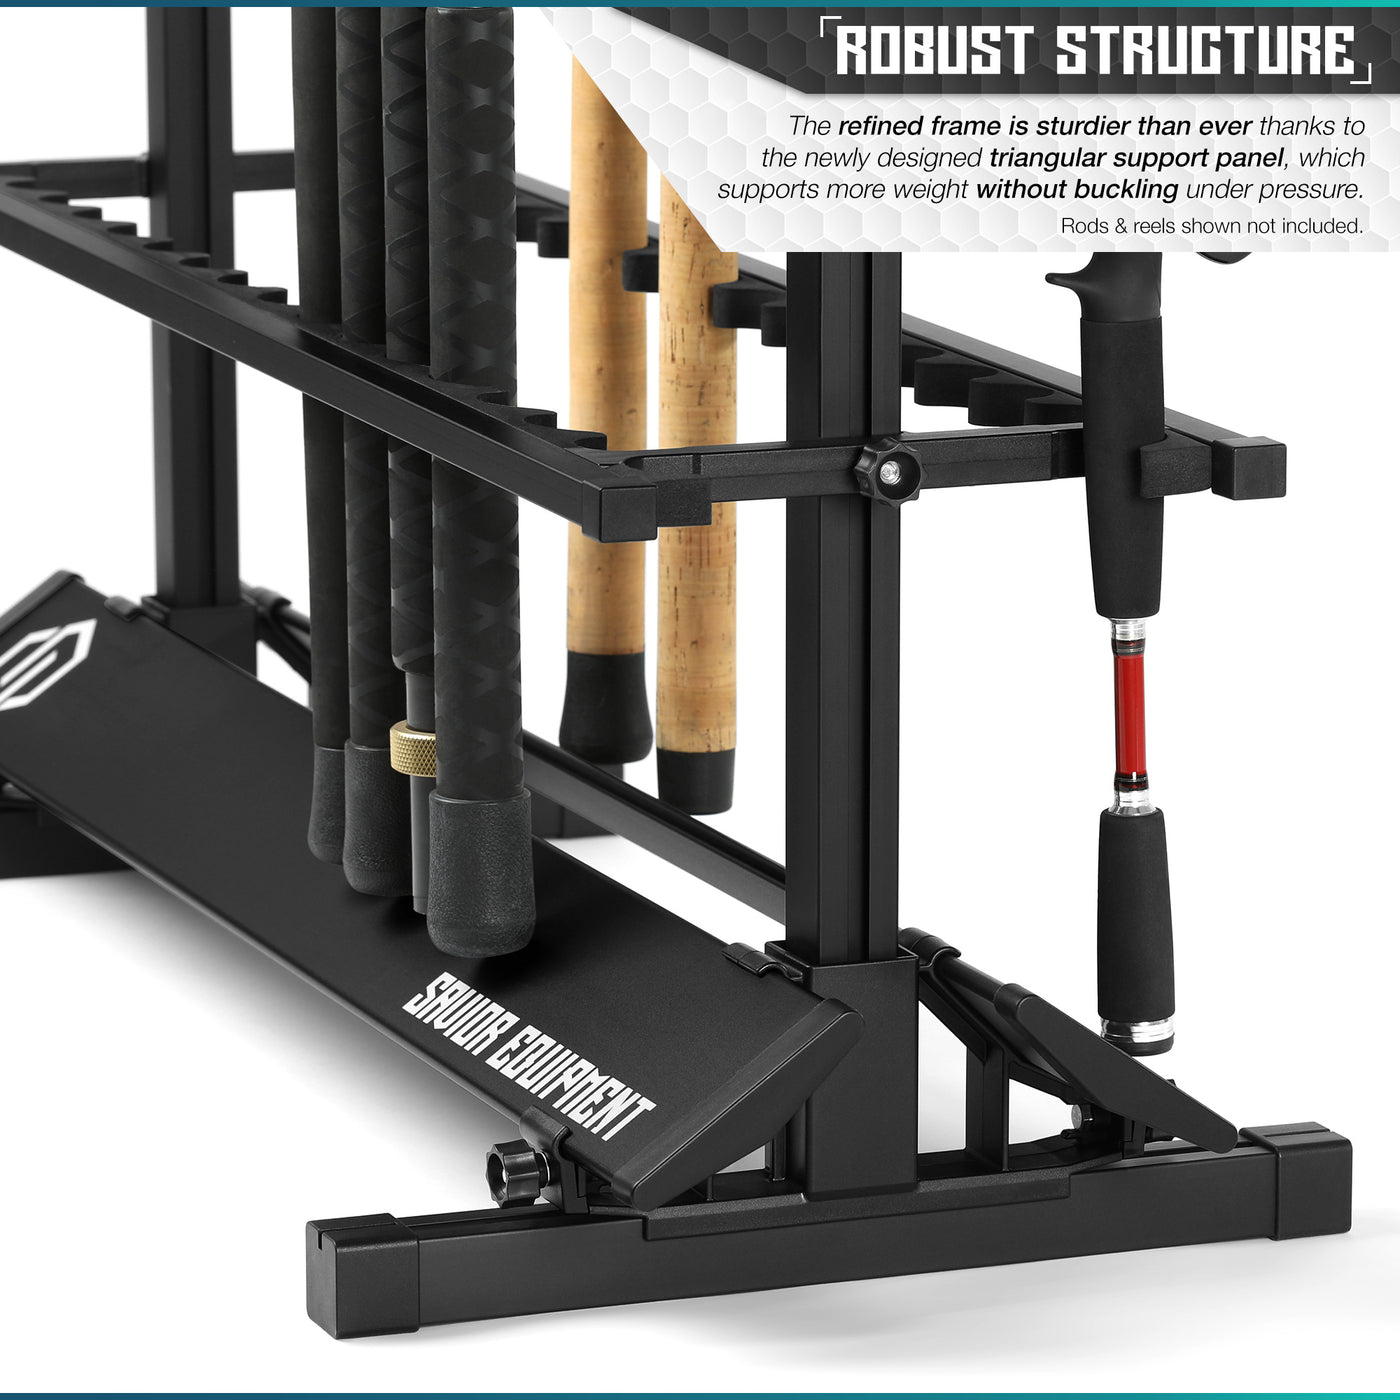 Robust Structure - The refinded frame is sturdier than ever thanks to the newly desgined triangular support level, which supports more weight without buckling under pressure. Rods & reels shown not included.